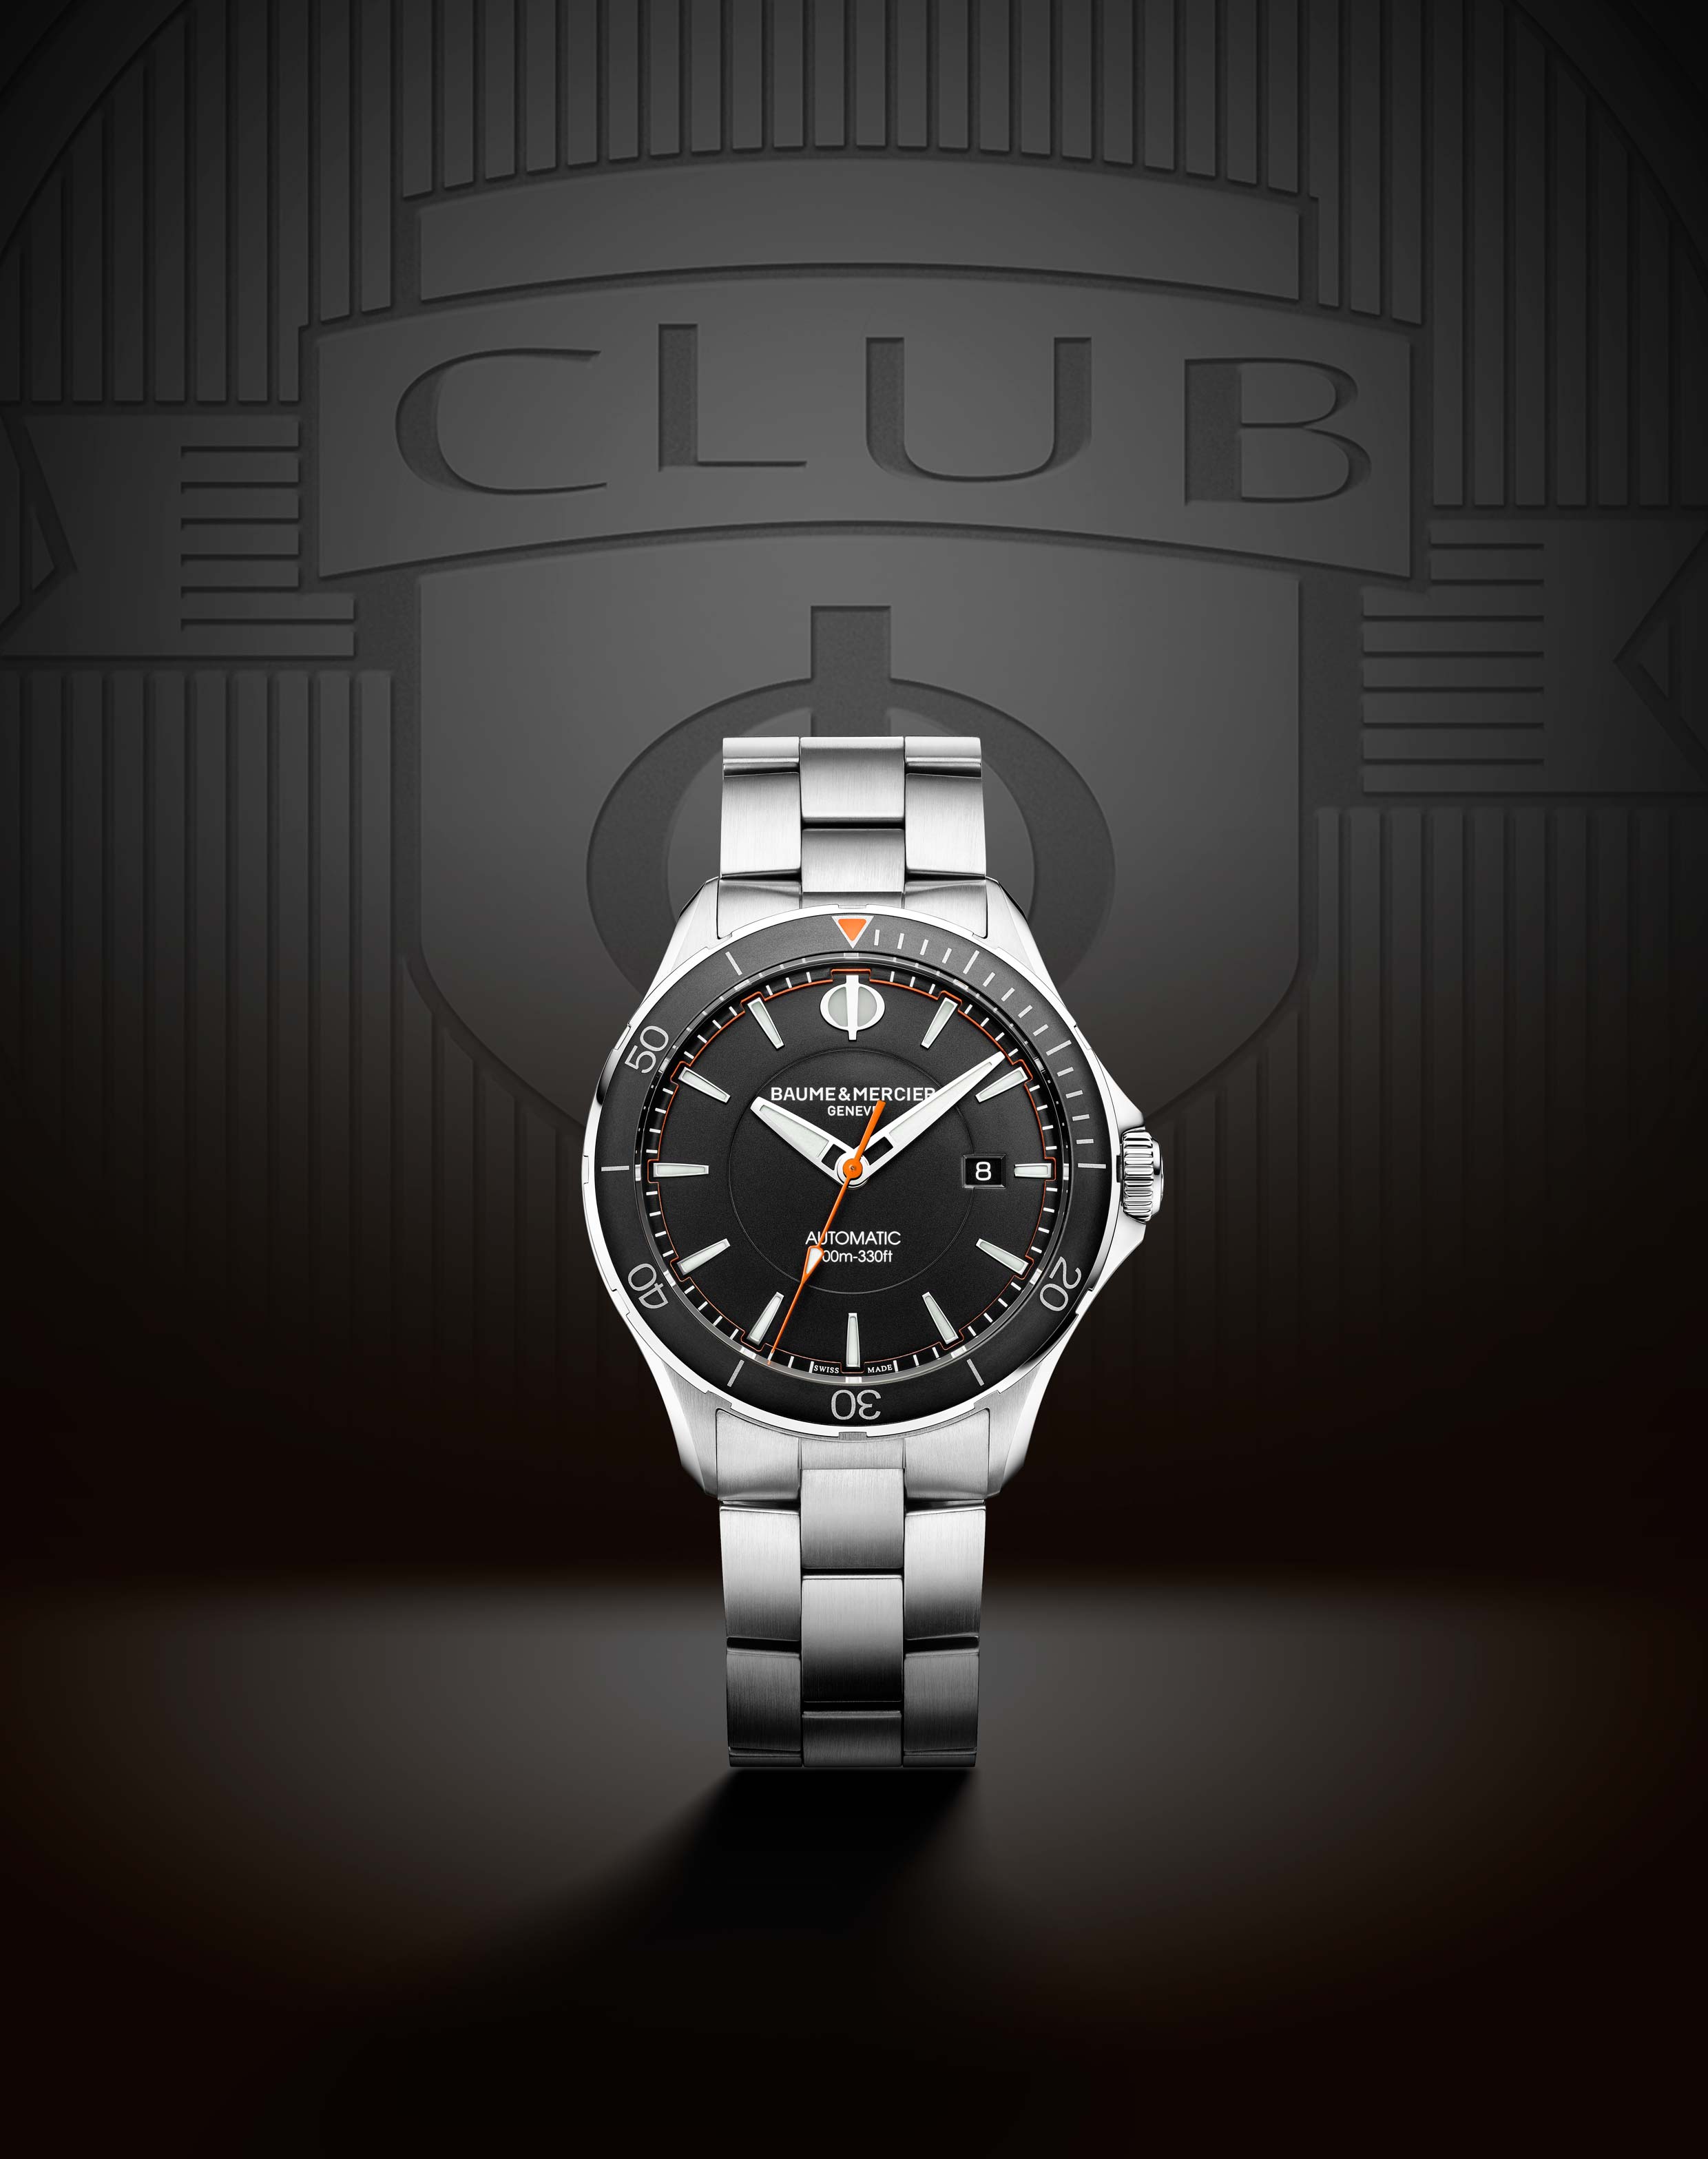 Baume & Mercier Clifton Club Collection comes in bracelet or strap versions.